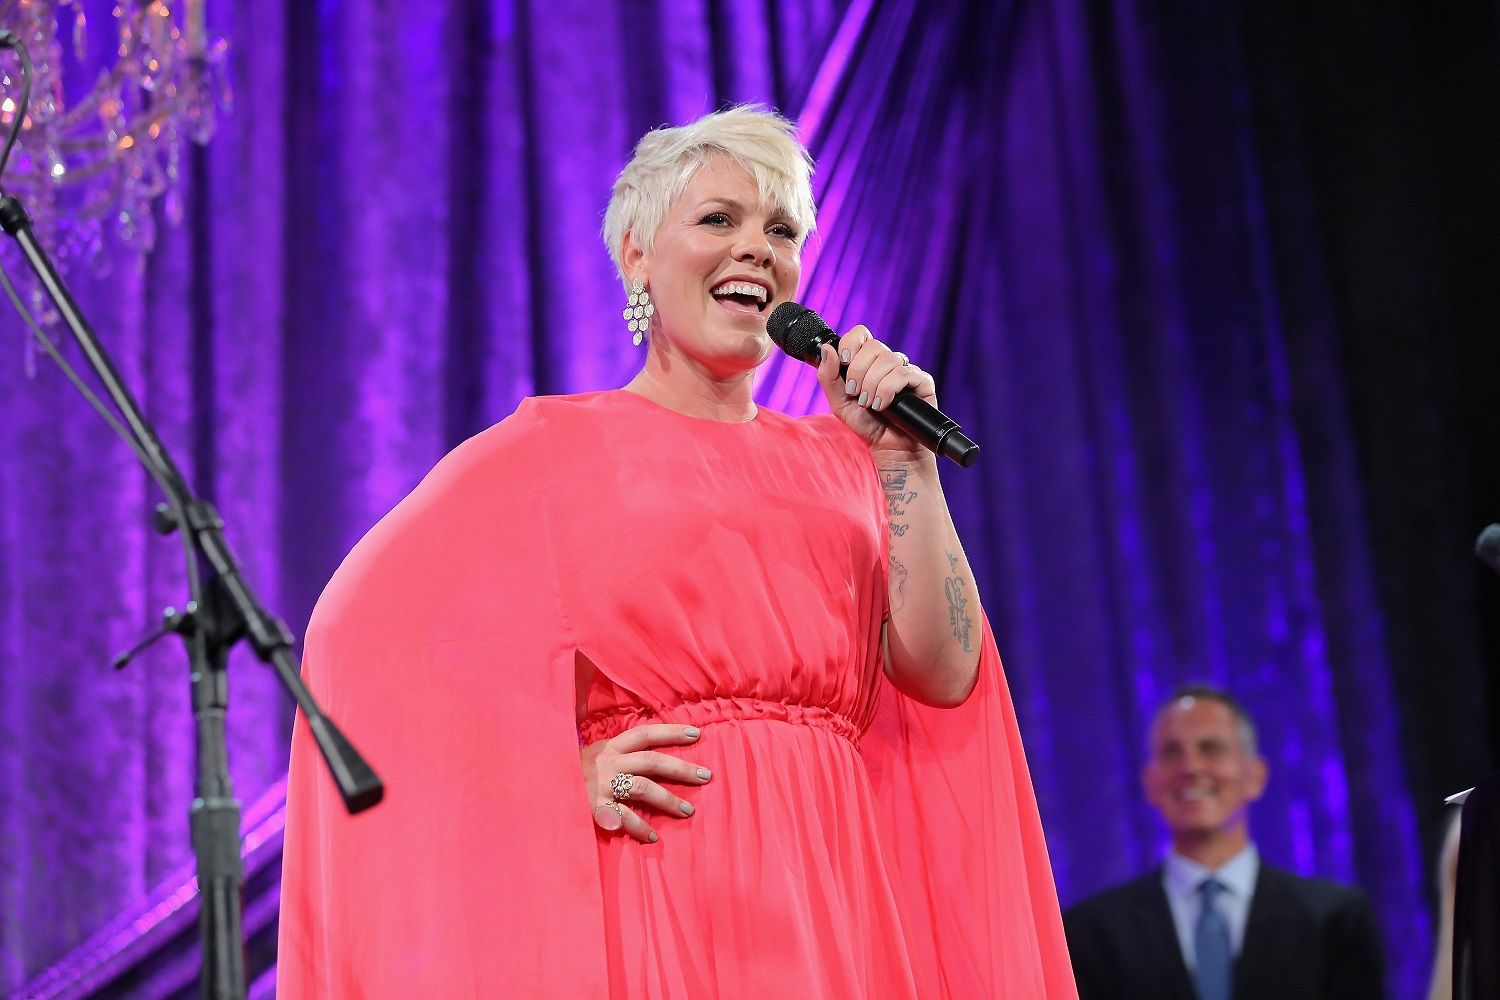 BEVERLY HILLS, CA - MAY 12:  Honoree P!nk performs onstage during the 63rd Annual BMI Pop Awards held at the Regent Beverly Wilshire Hotel on May 12, 2015 in Beverly Hills, California.  (Photo by Chelsea Lauren/Getty Images for BMI)